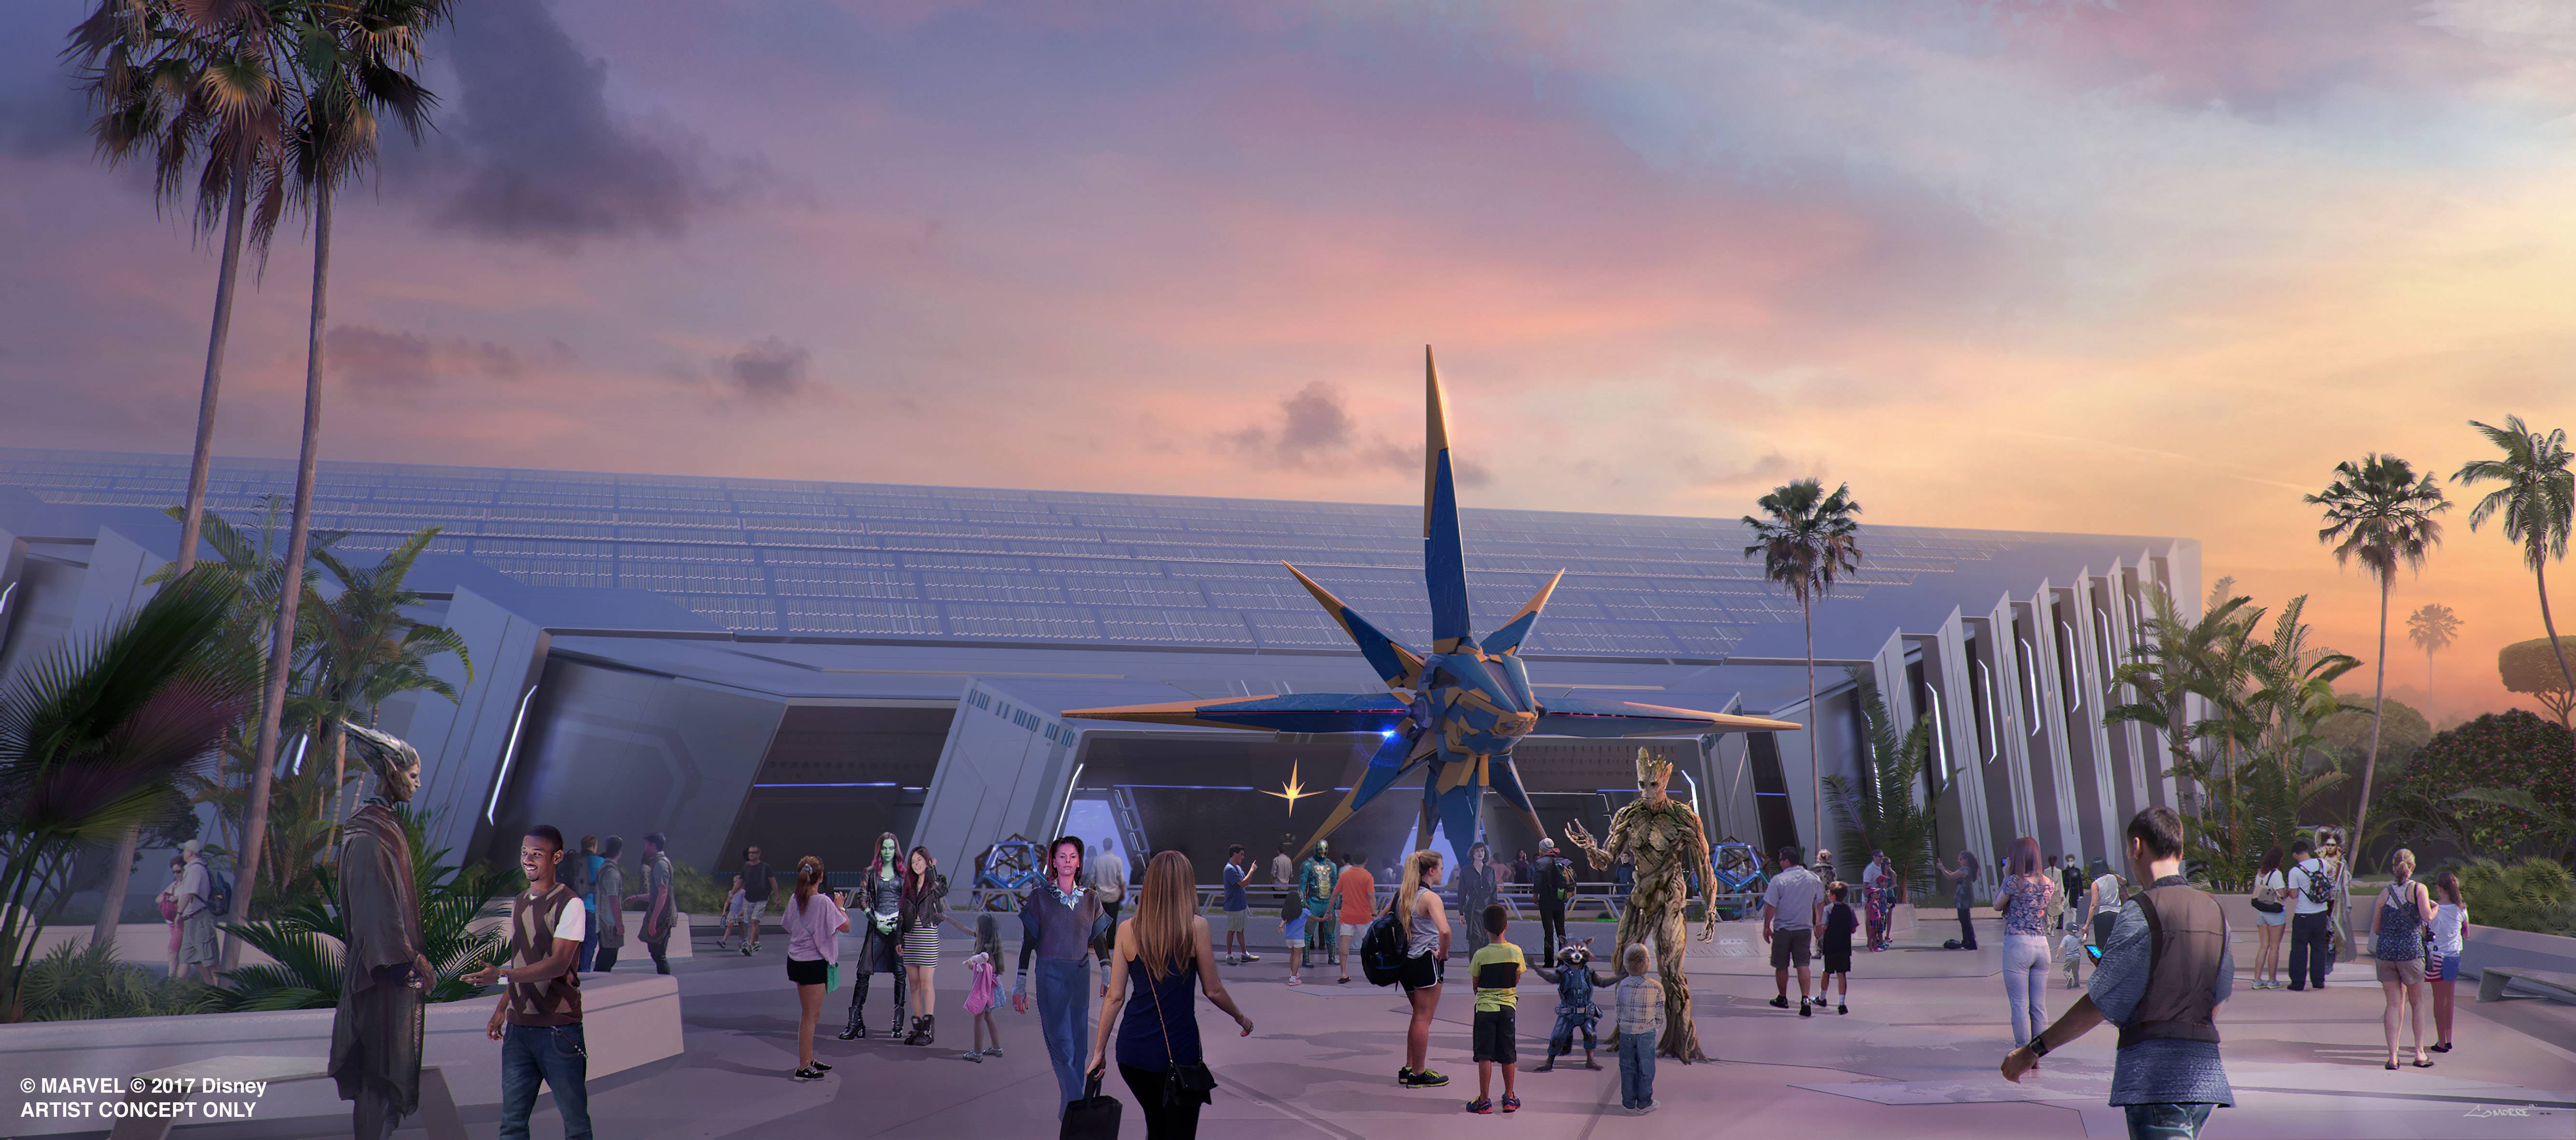 New details and descriptive walk-through of the 'Guardians of the Galaxy Cosmic Rewind' queue and pre-show